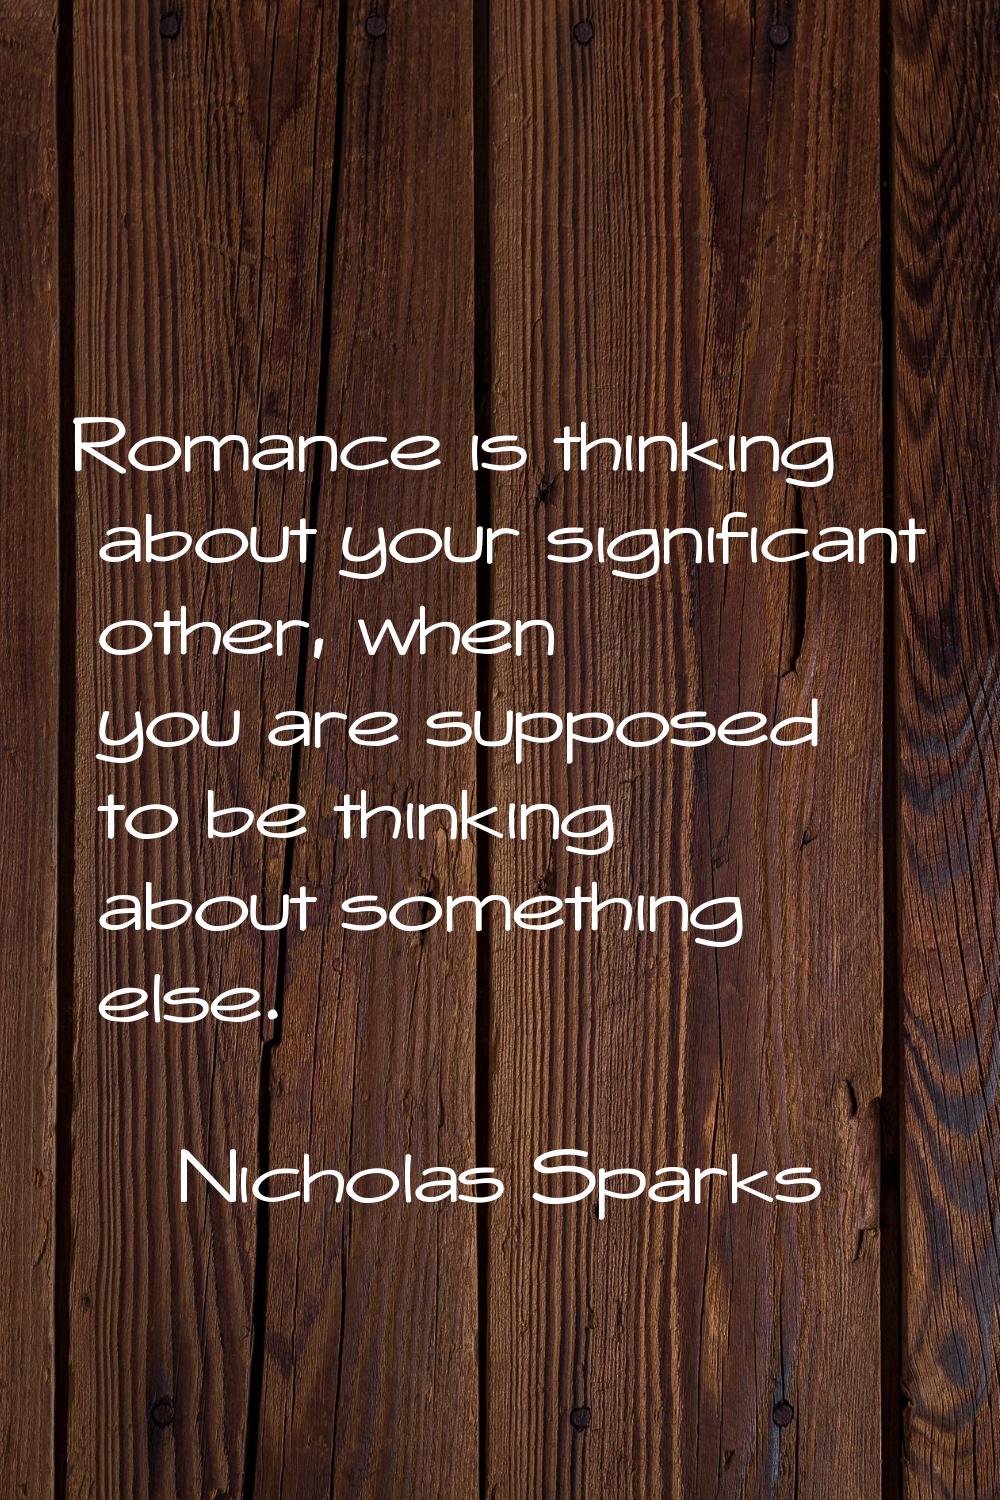 Romance is thinking about your significant other, when you are supposed to be thinking about someth